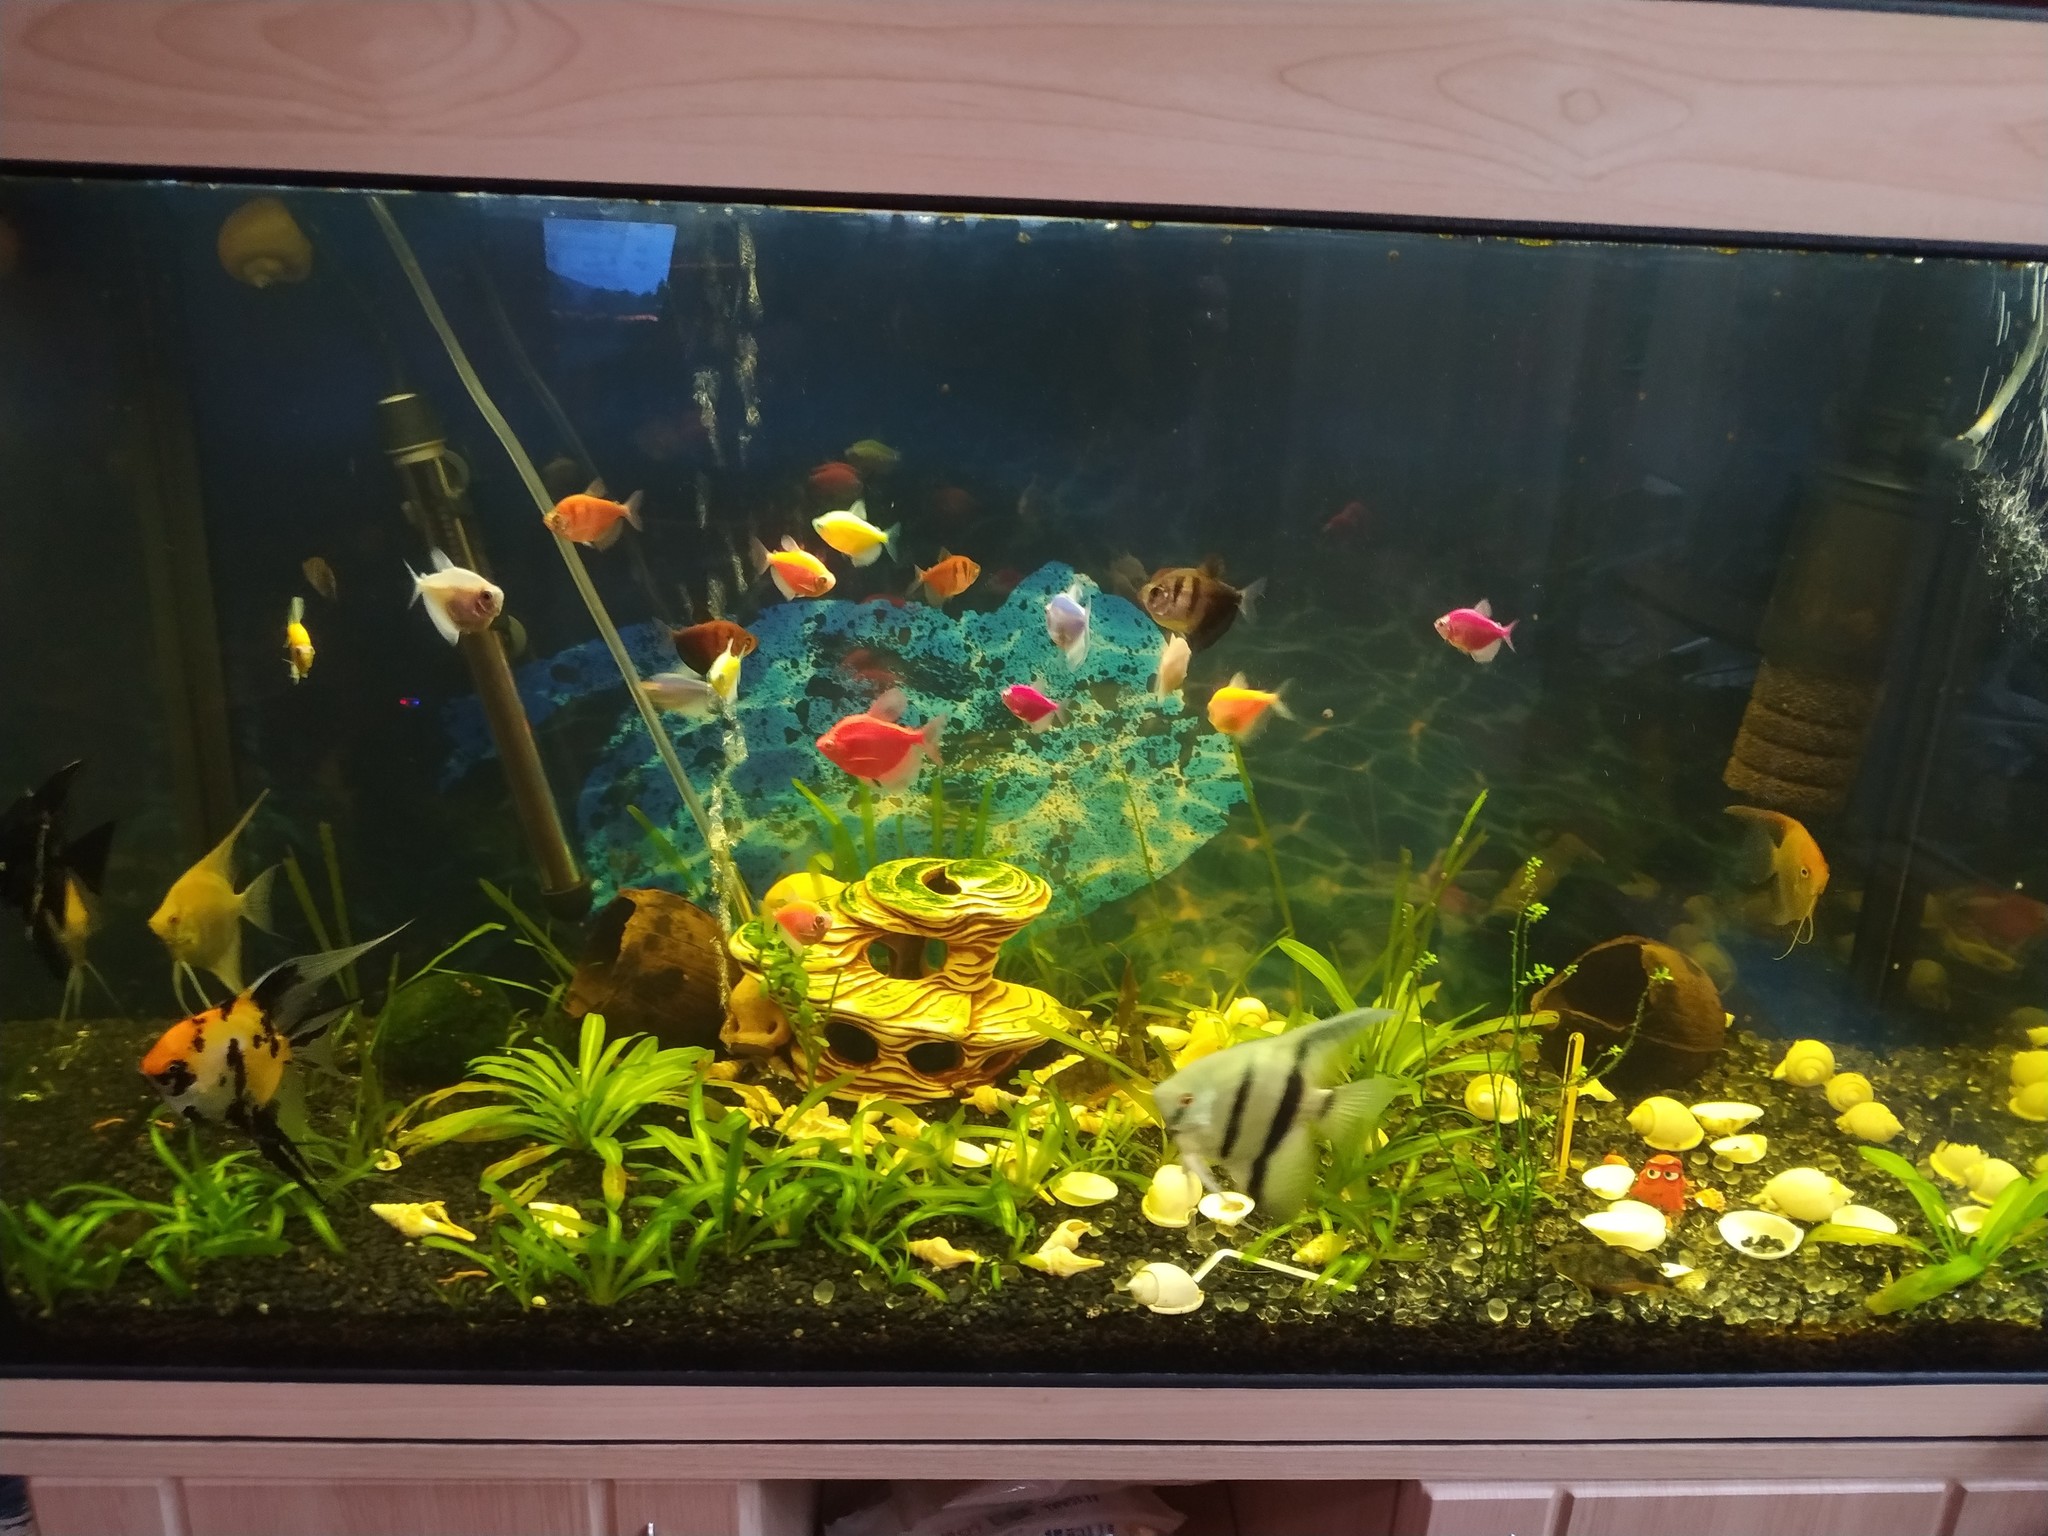 Hello everyone. Tell me how to move a 160 liter aquarium so as not to seriously spoil what grows and lives there - Aquarium, A fish, Relocation